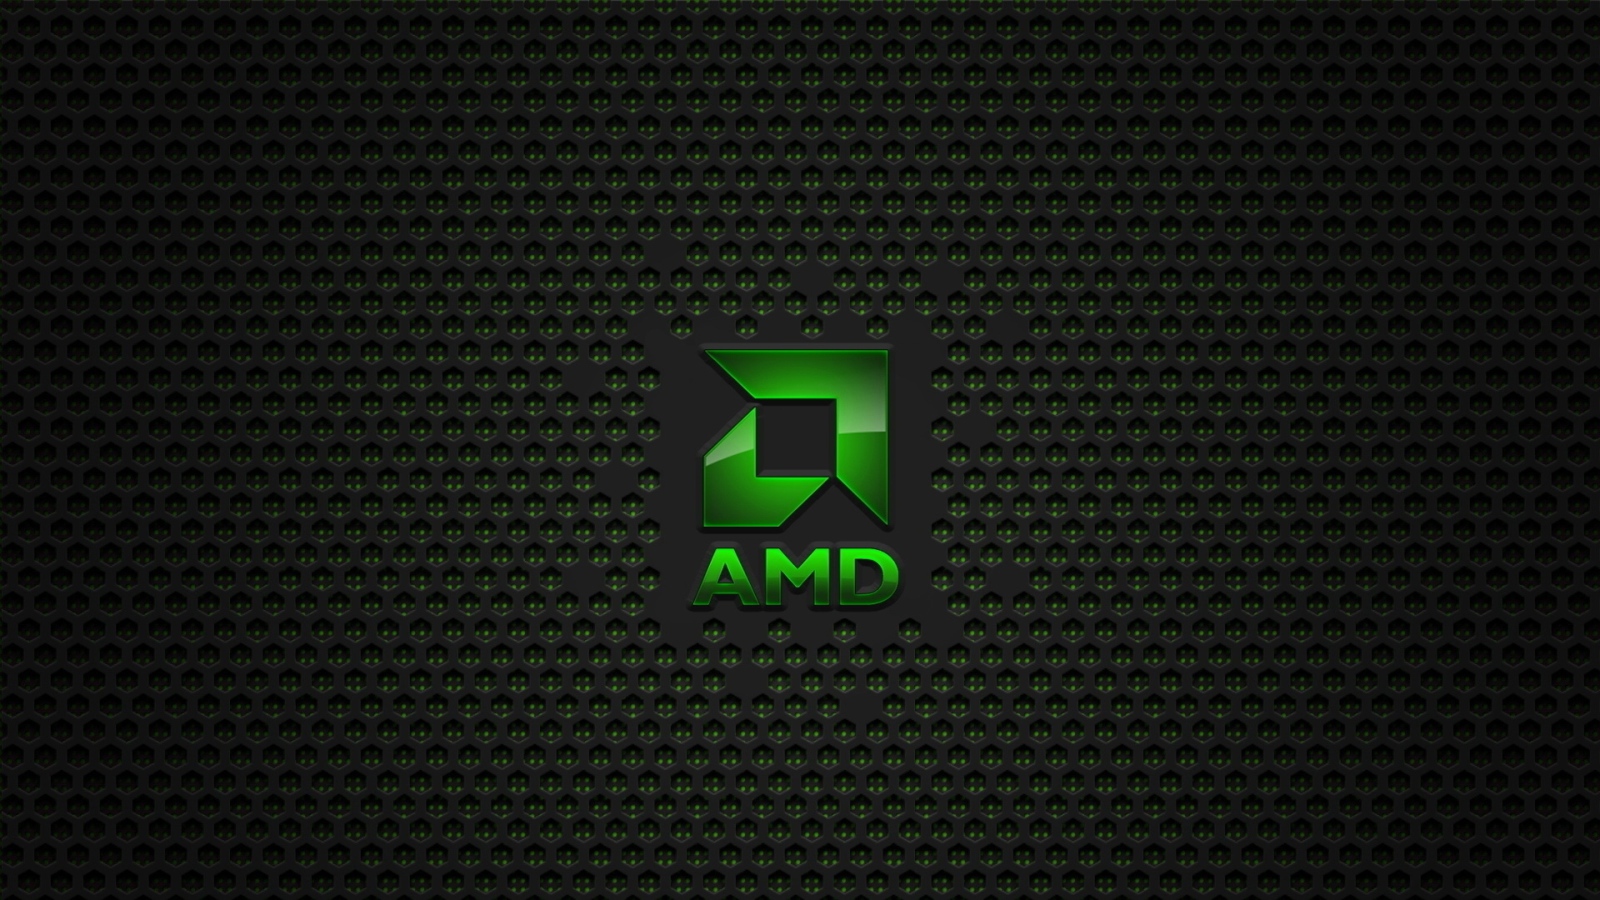 AMD green icon on a mesh background